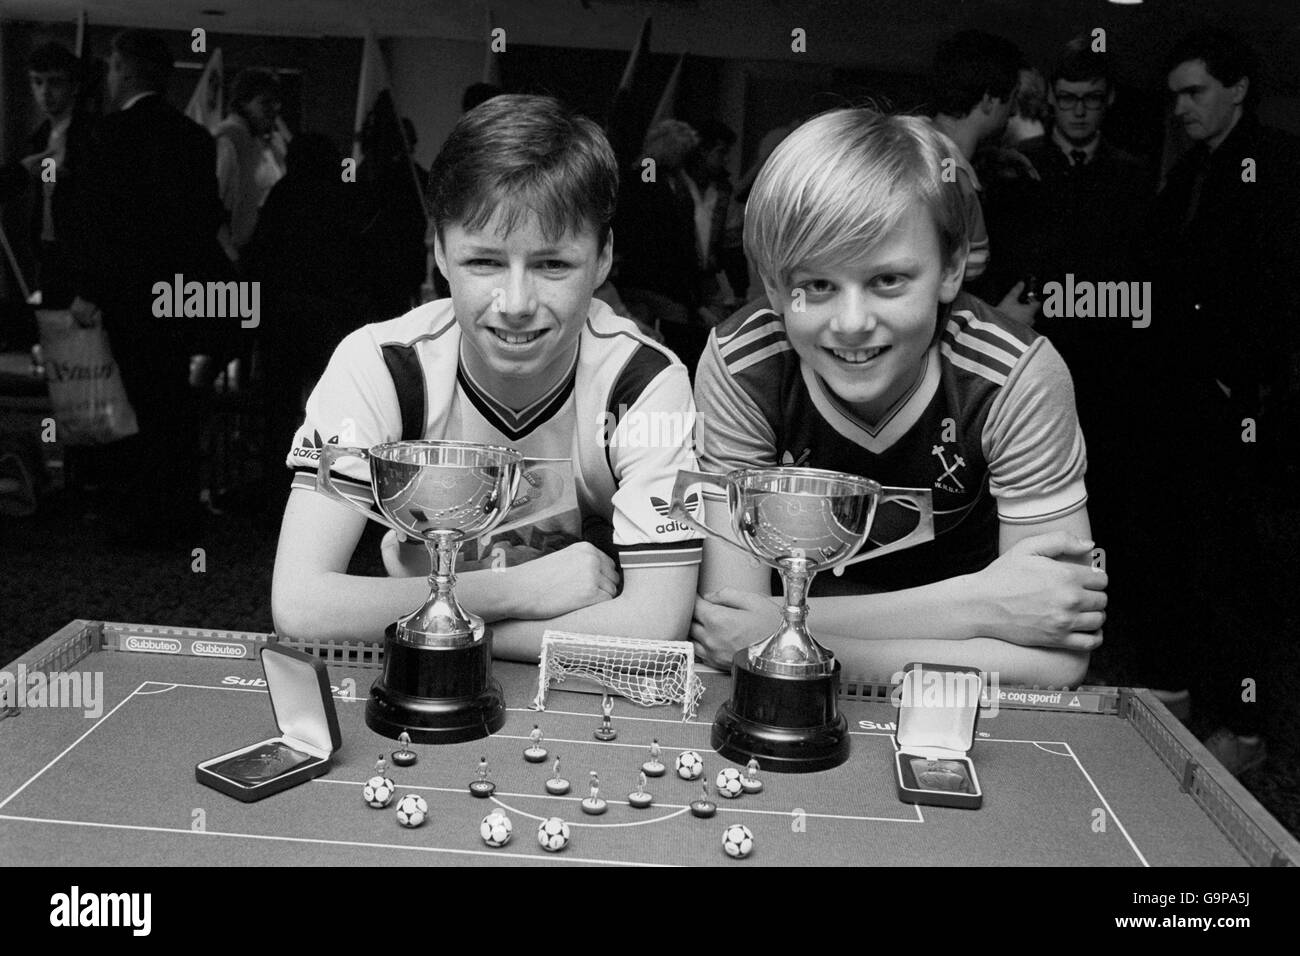 Table soccer stars Darrell Dunscombe (left) of Stockport and Justin Finch of Coventry with their trophies after darrell, 16, won the senior and Justin, 15, the junior Subbuteo World British finals at the Ladbroke International Hotel in Wembley today. Stock Photo